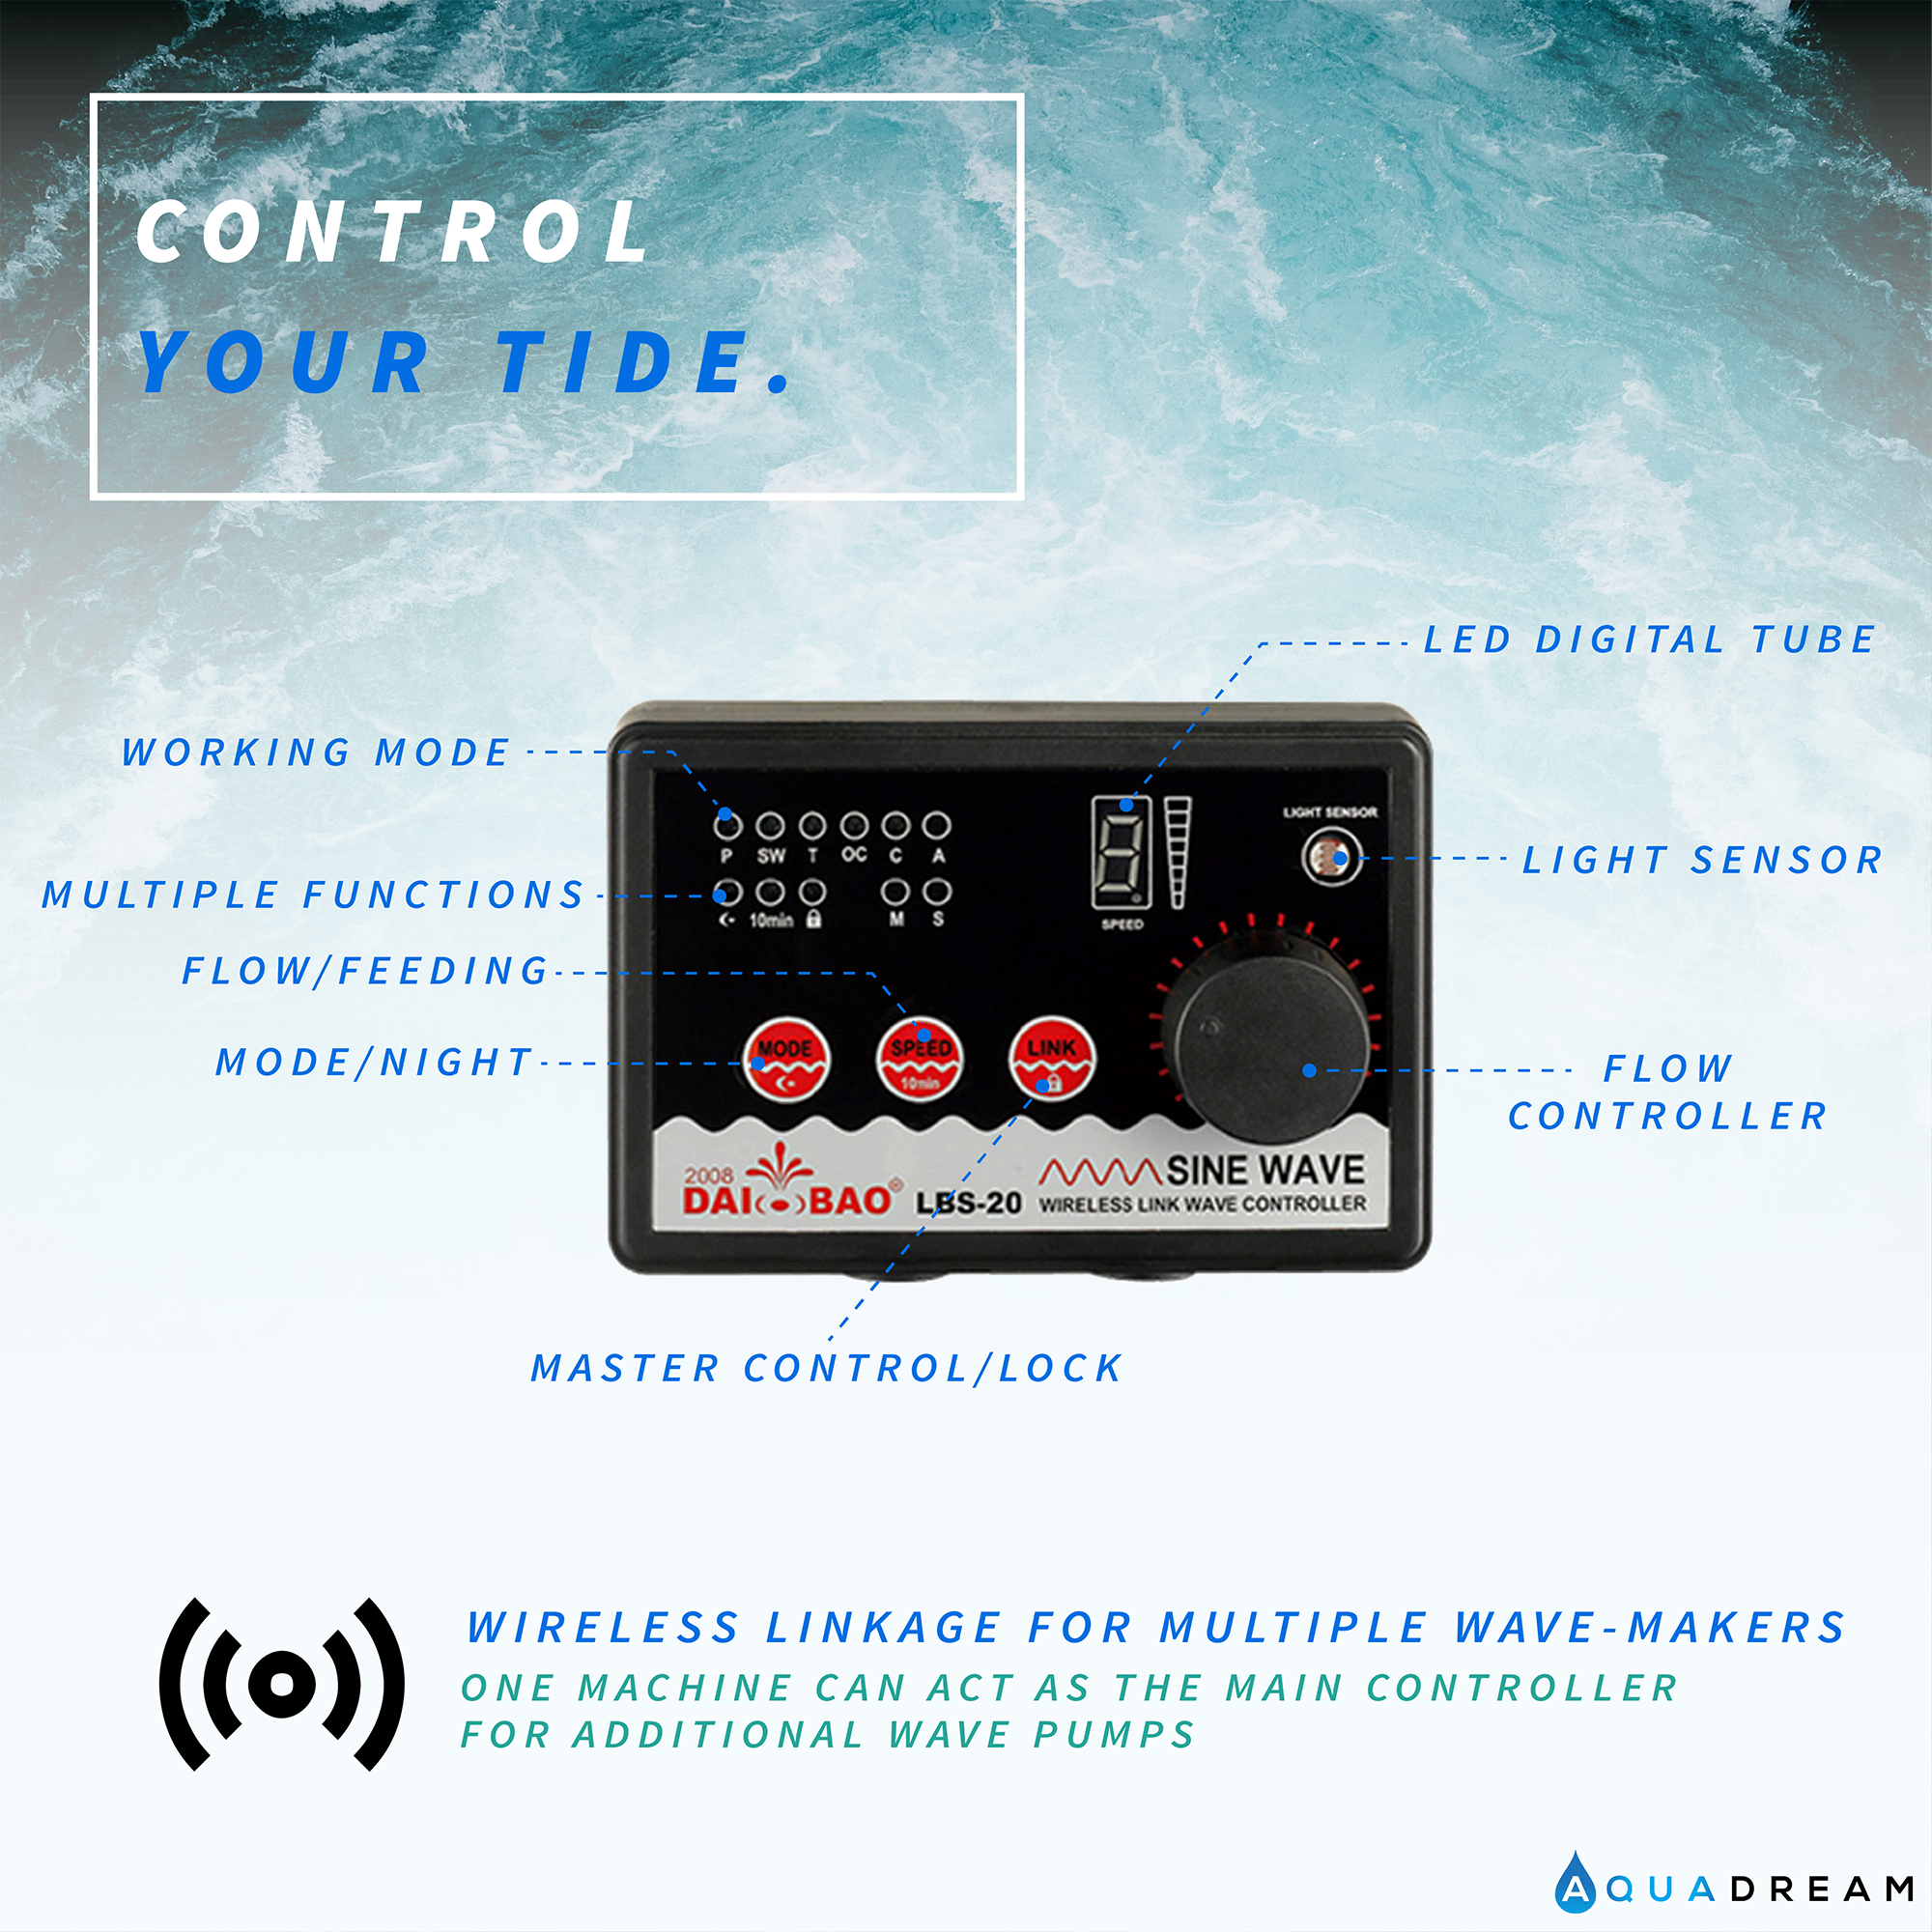 Control Your Tide